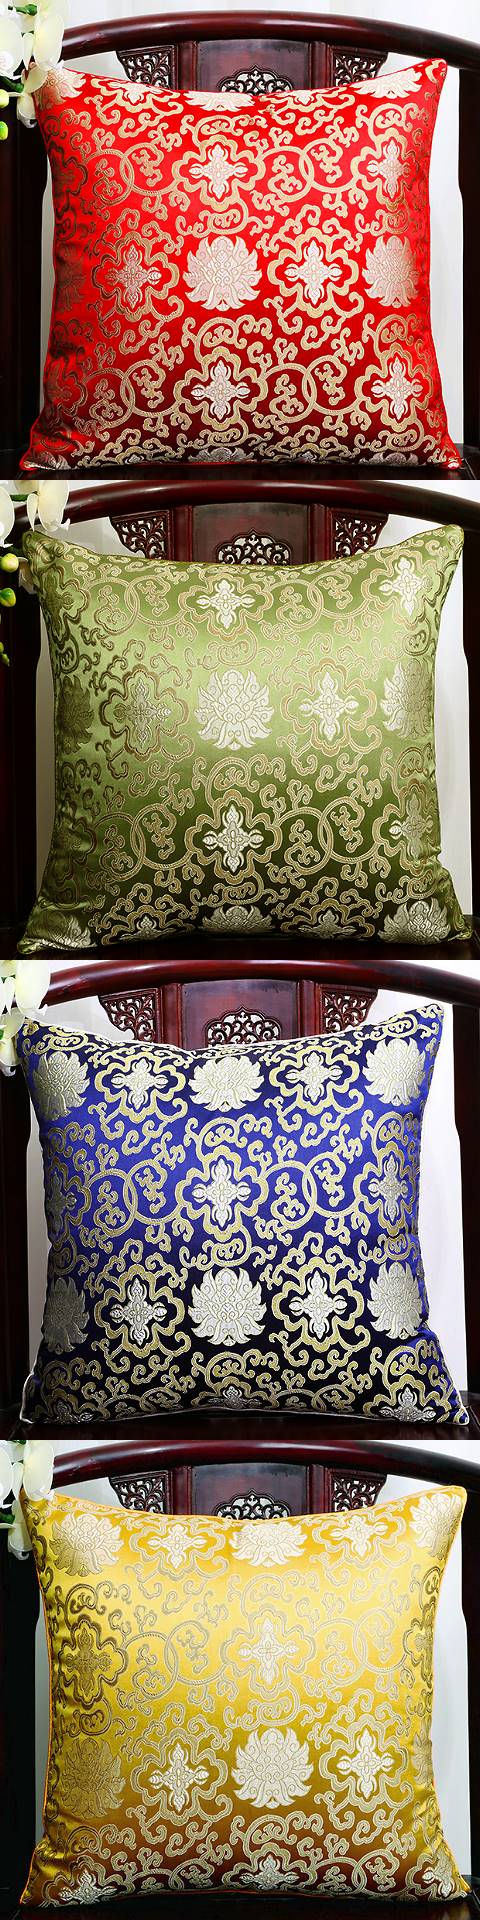 Bargain - Chinese Ethnic Lotus Embroidery Cushion Cover